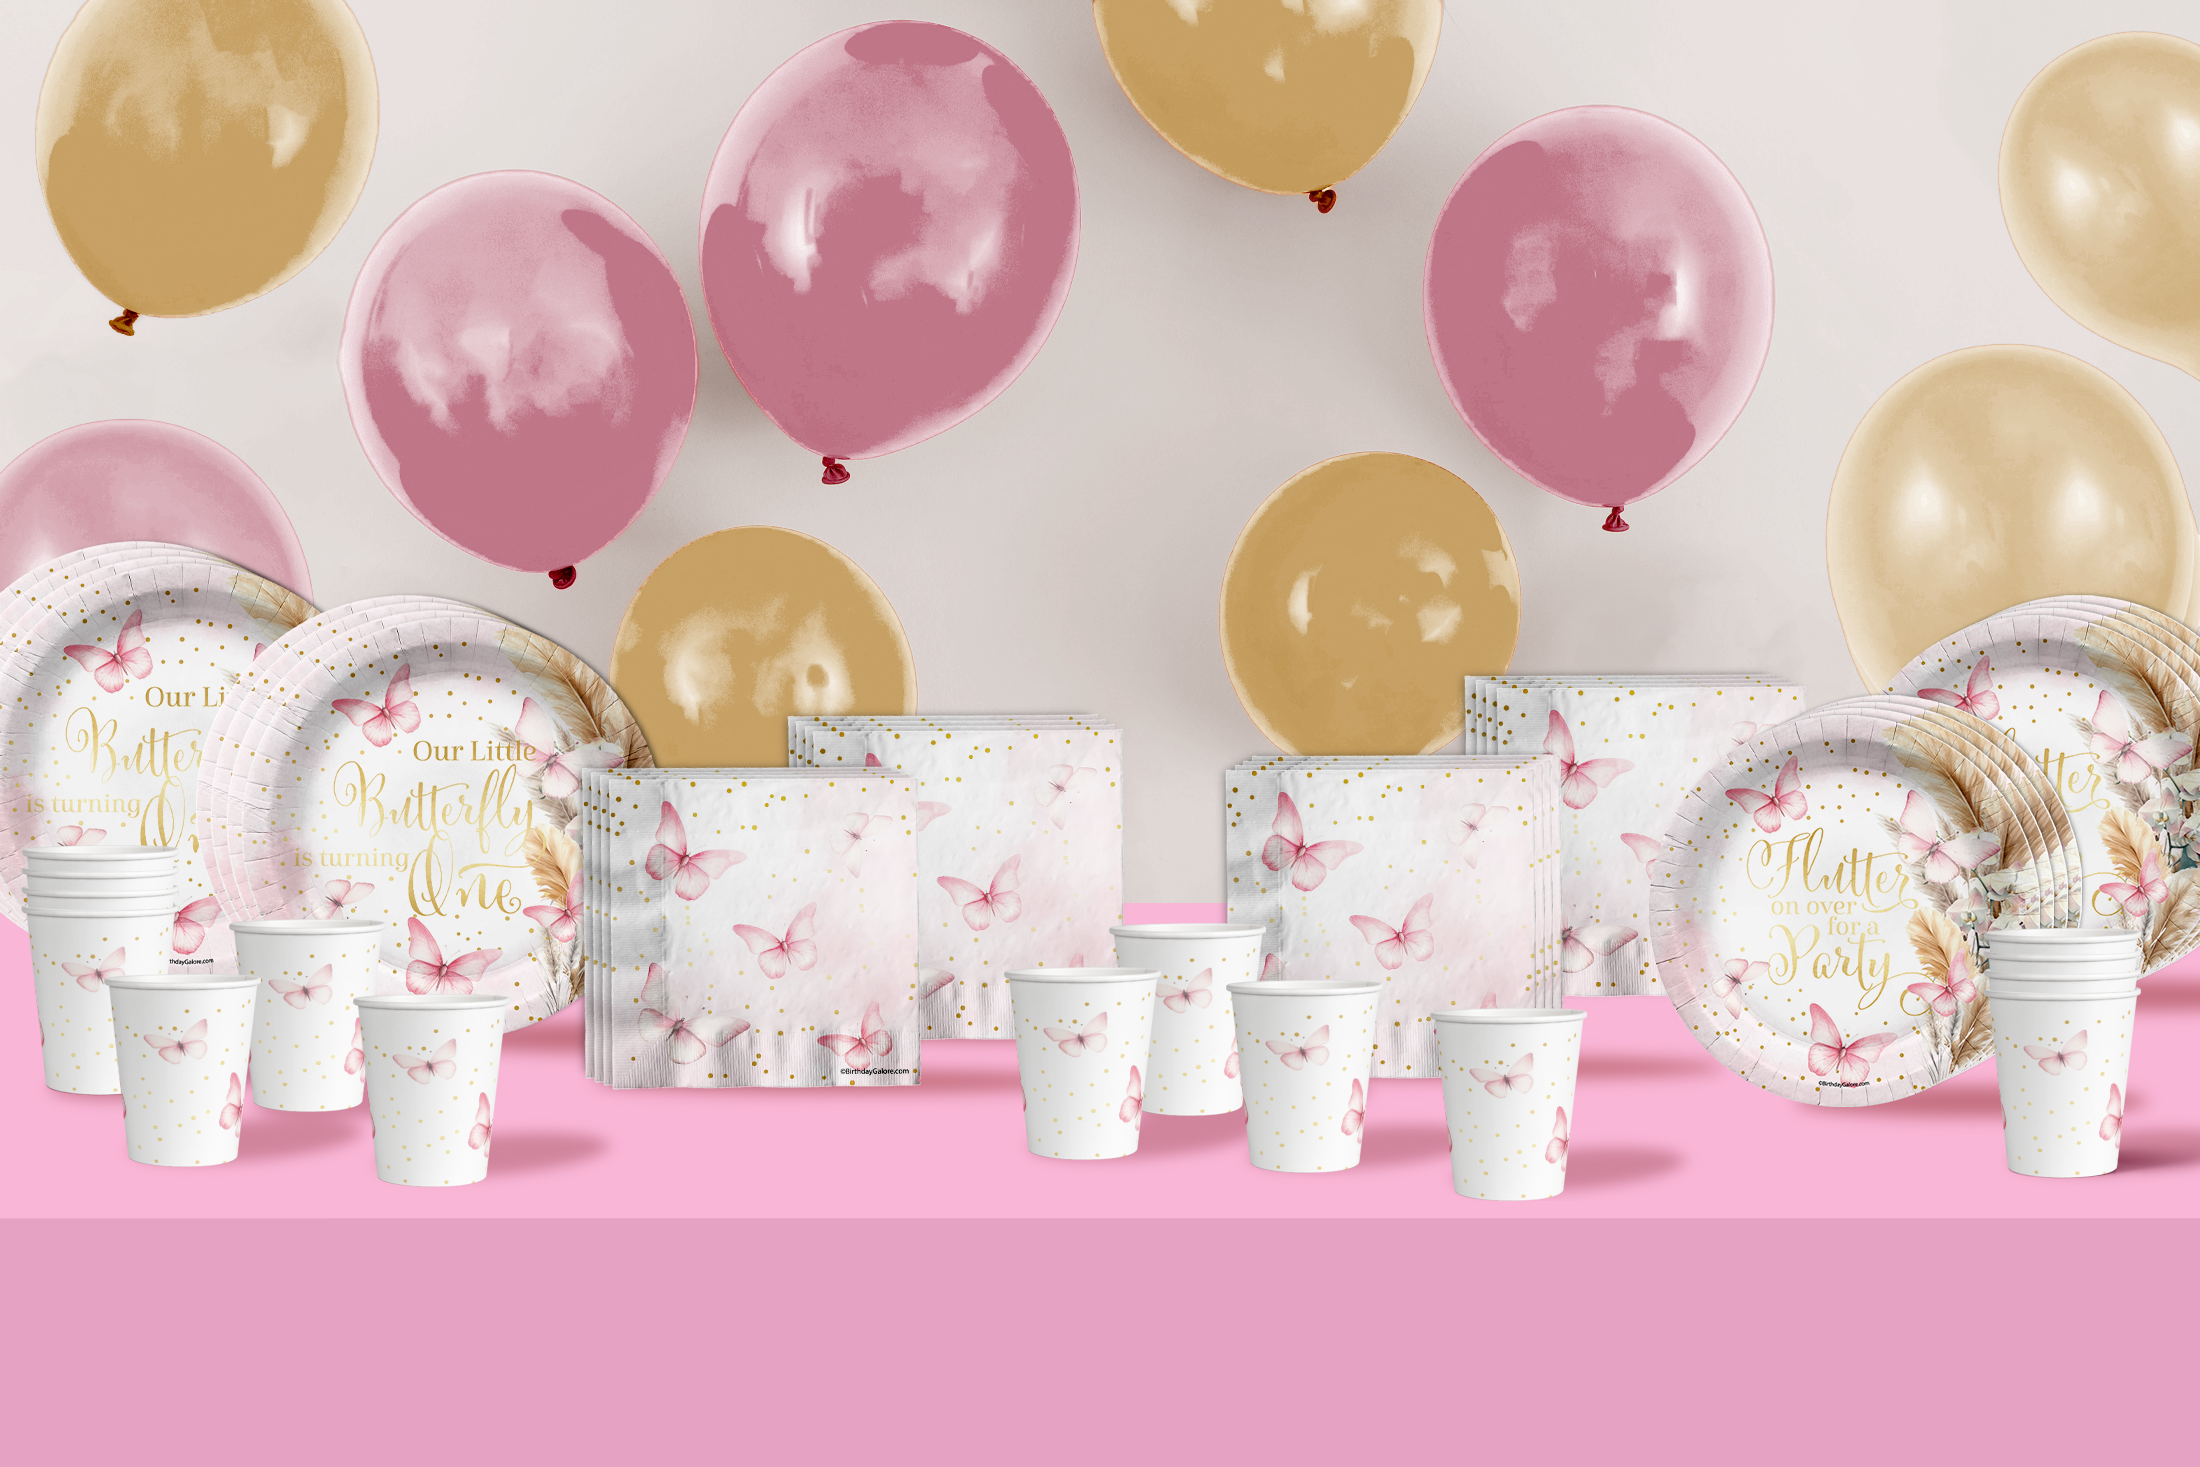 Butterfly Girl's 1st Birthday Party Supplies 64 Piece Tableware Set Includes Large 9" Paper Plates Dessert Plates, Cups and Napkins Kit for 16